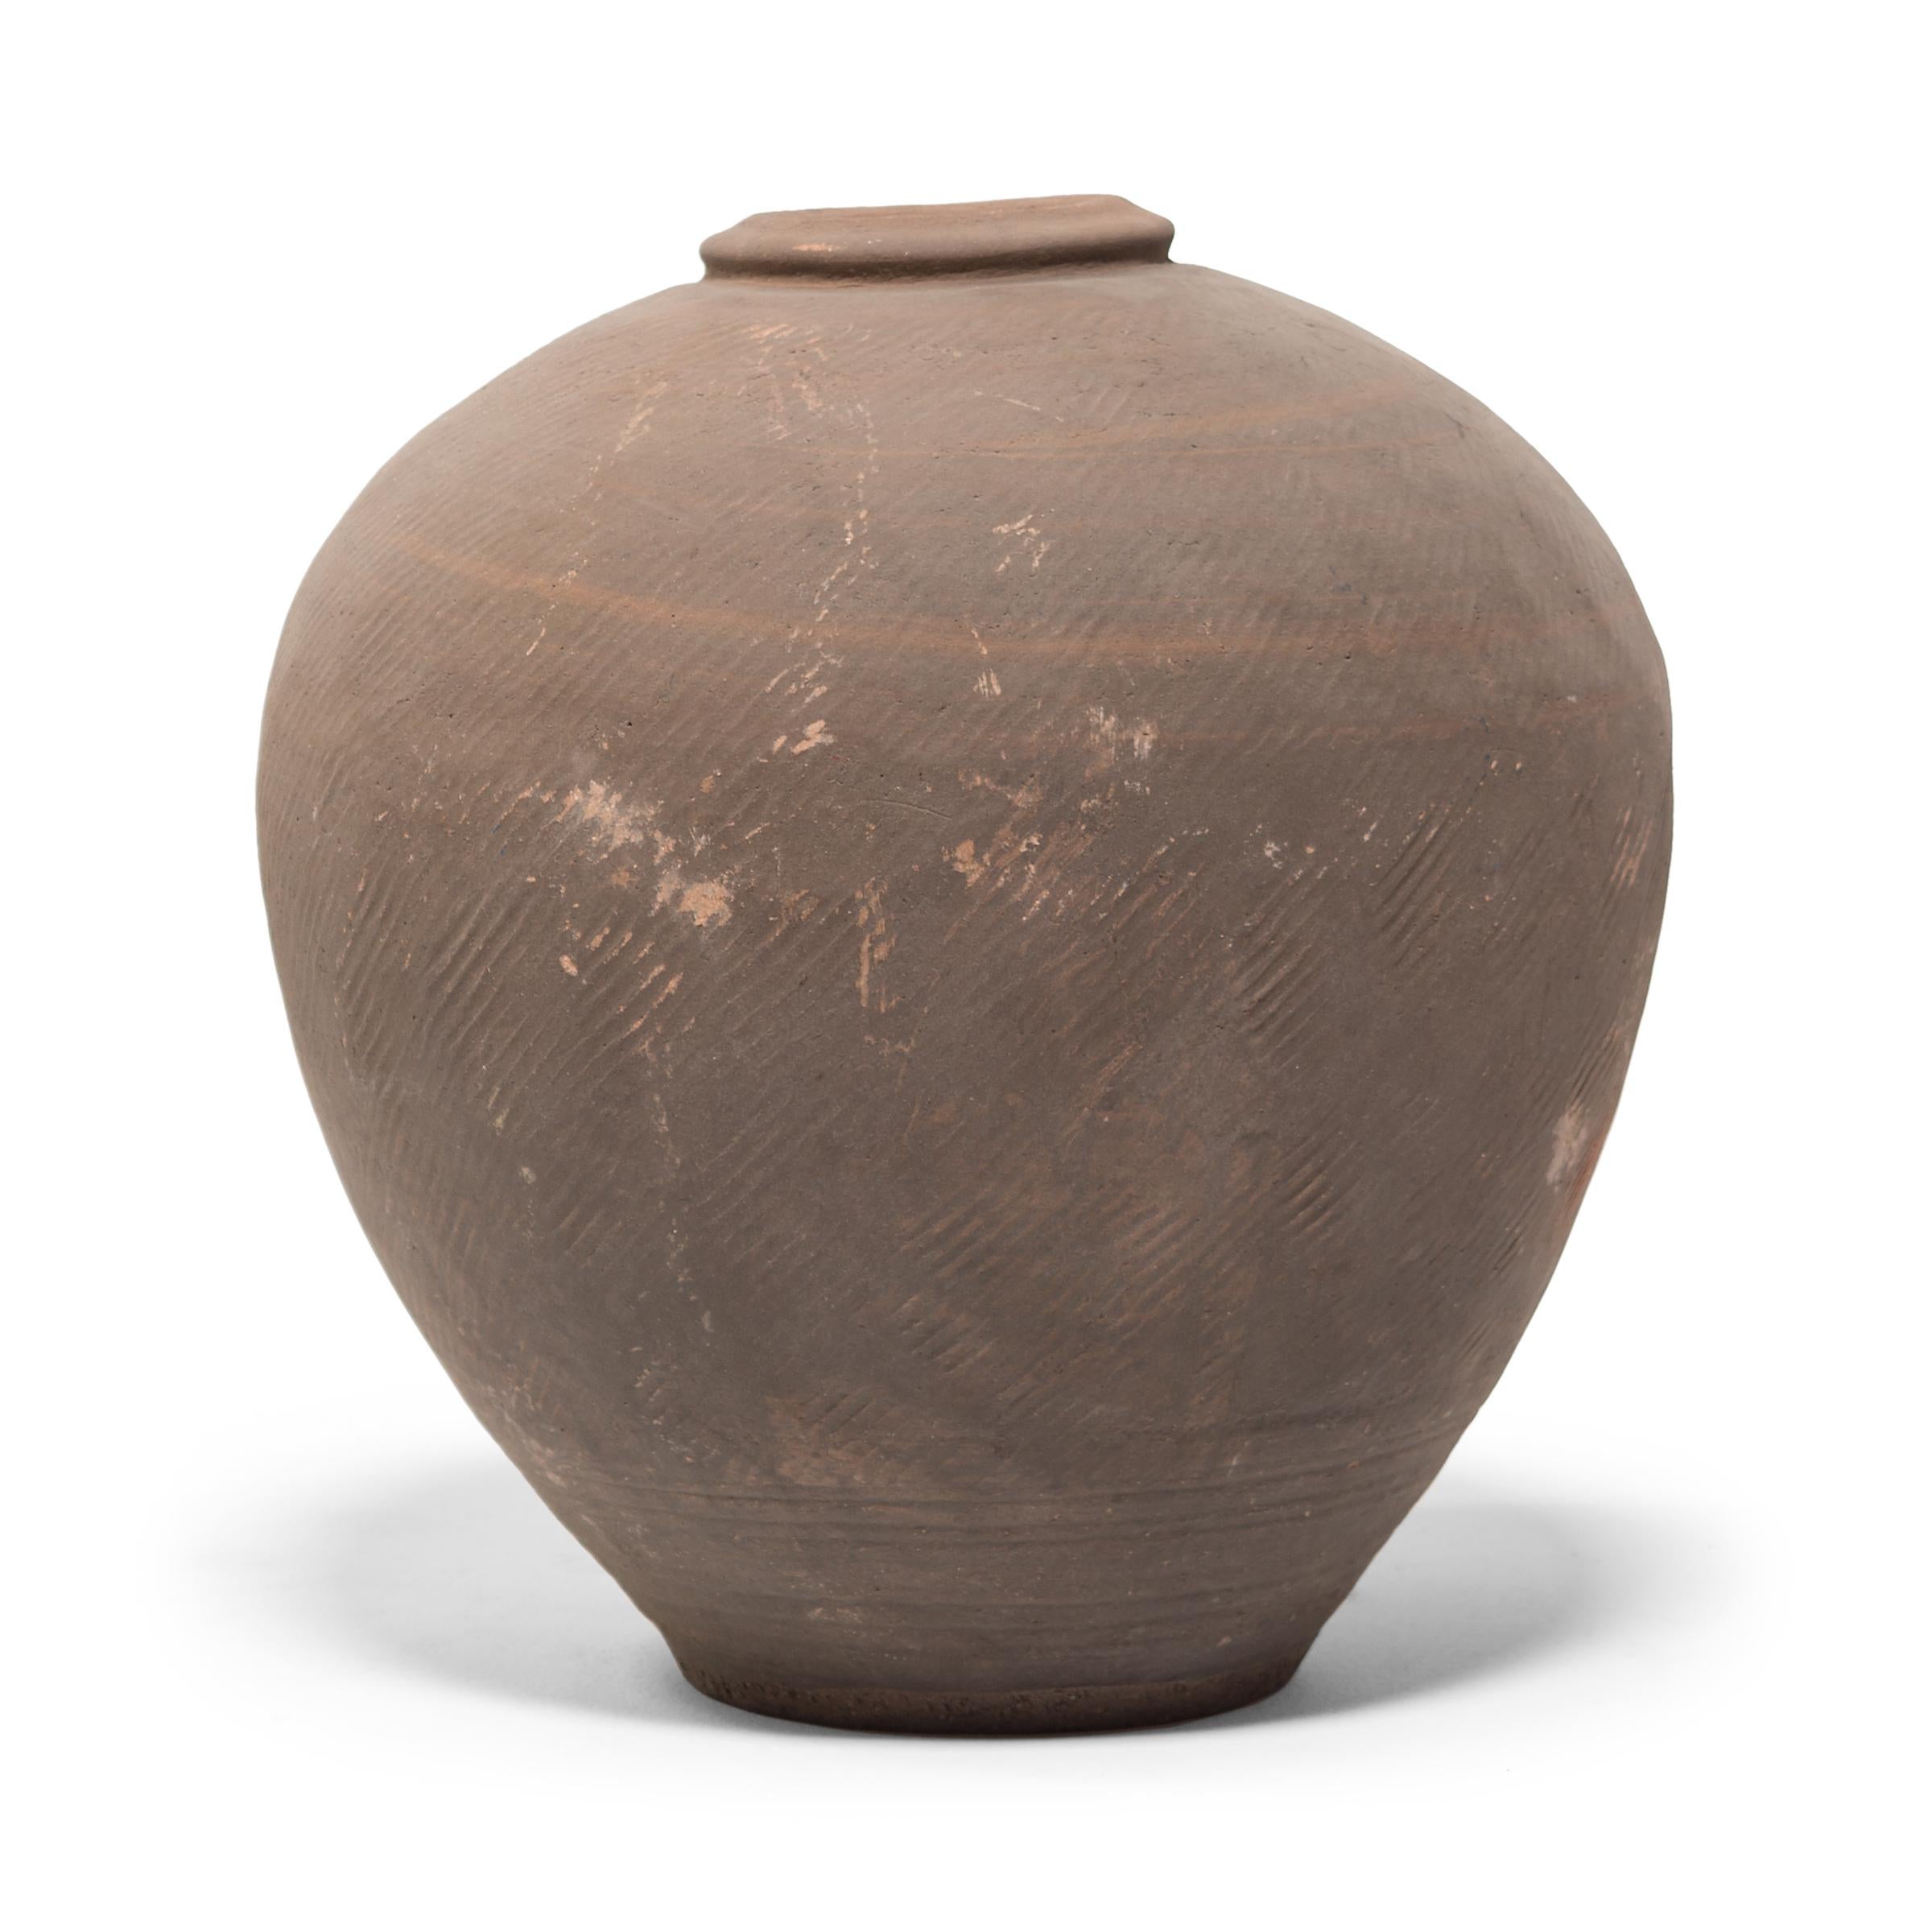 This 19th century ceramic jar from northern China is formed in a traditional shape meant for storing wine and spirits made from rice and grains. Variation during firing has resulted in delightfully irregular patterns over its textured surface, and